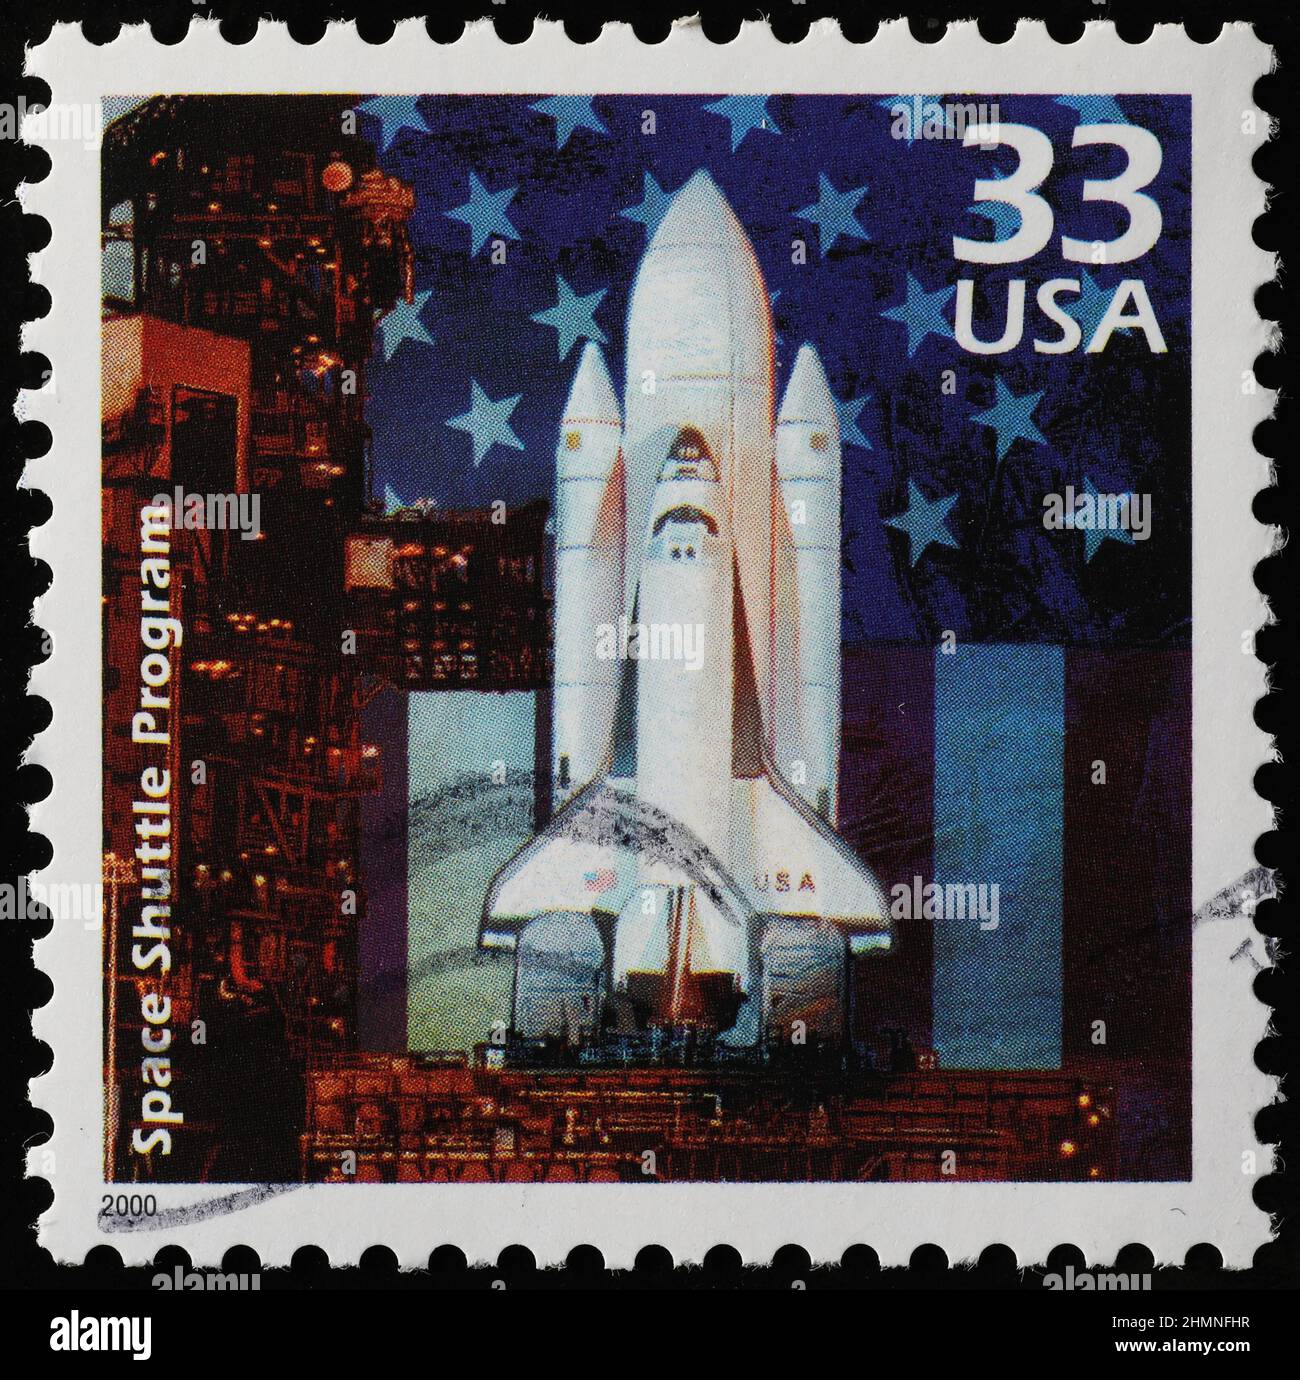 Space Shuttle Program celebrated on american stamp Stock Photo